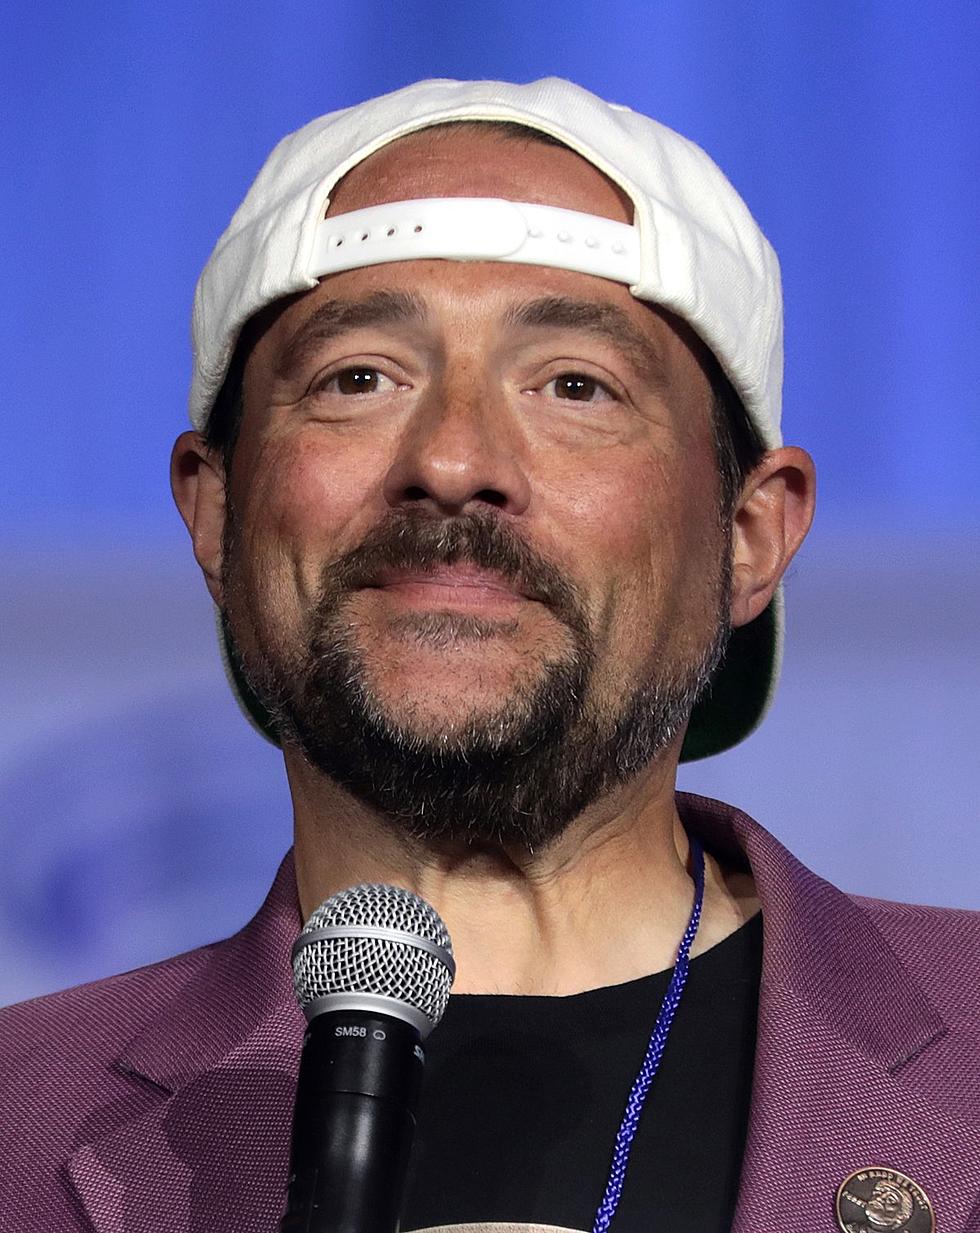 NJ’s Kevin Smith: ‘Take that dream right up until the end, kids’